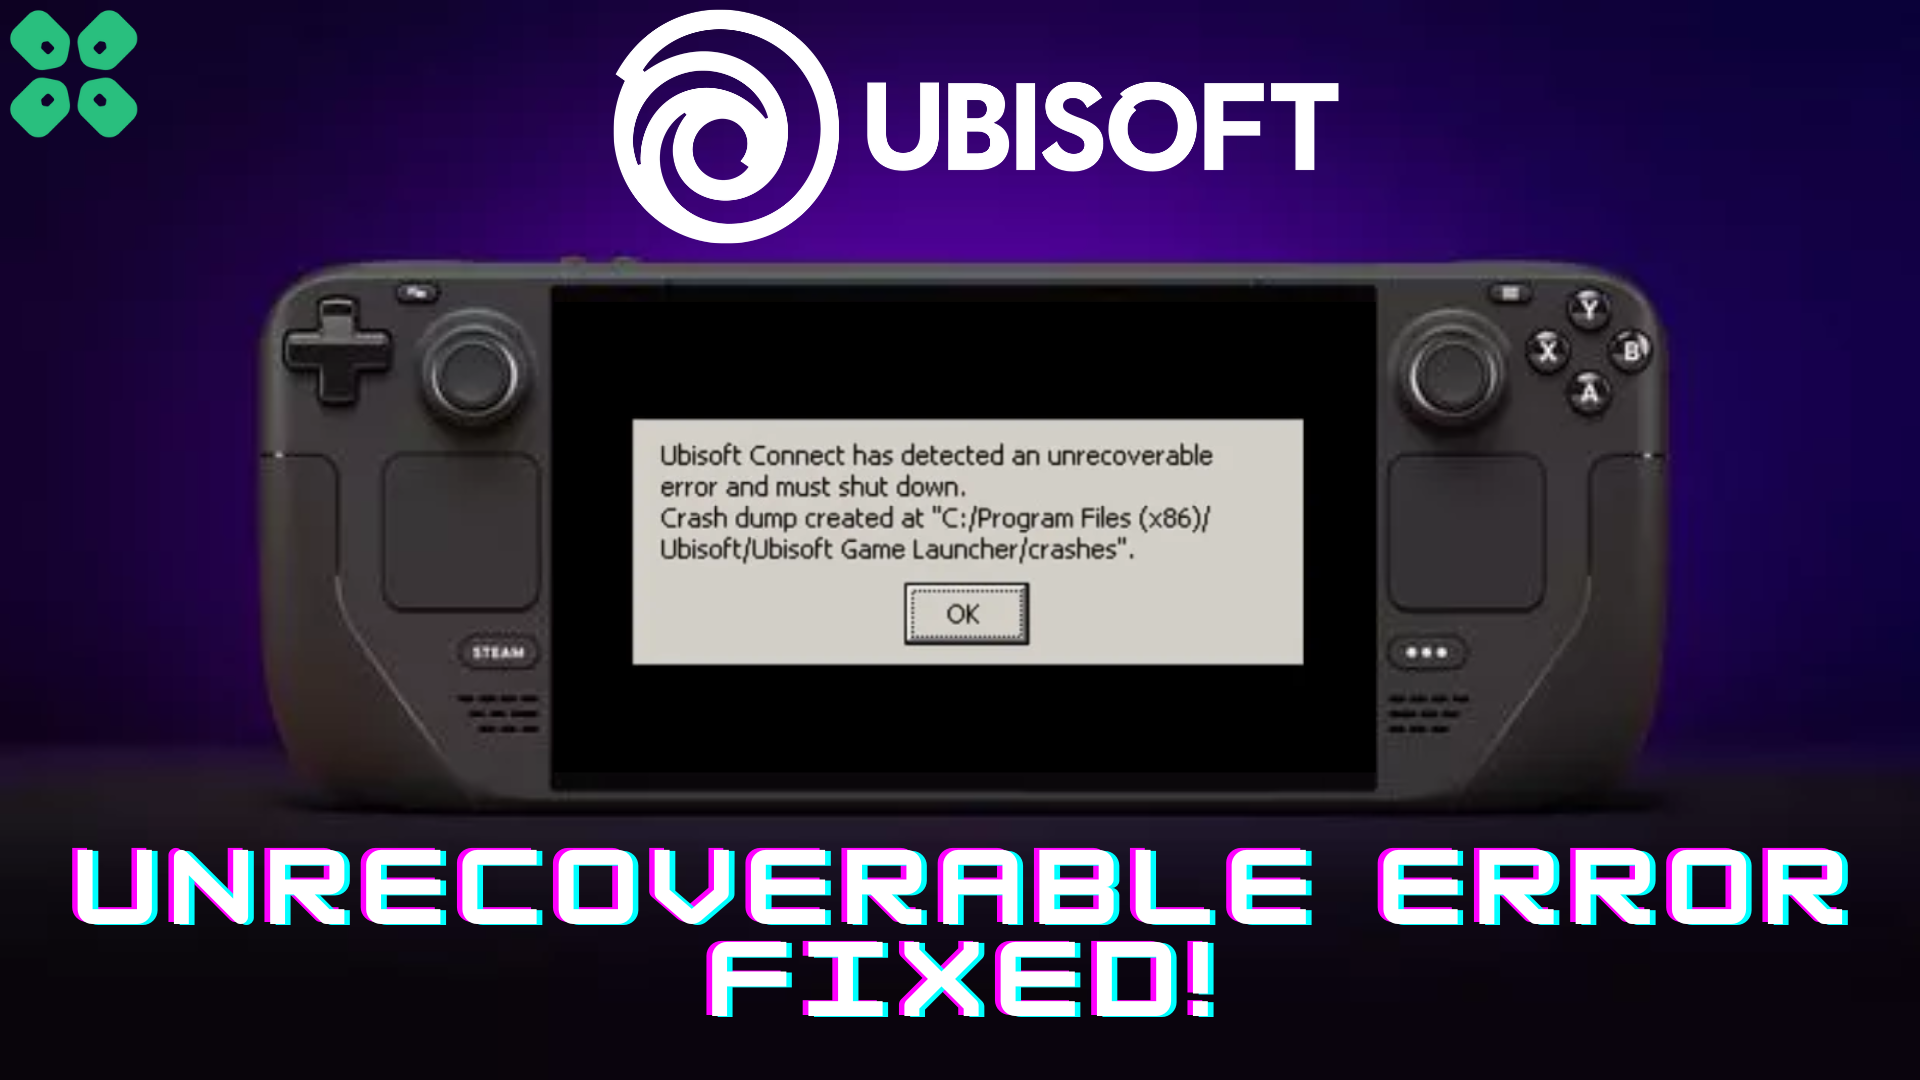 How to fix Ubisoft Connect Unrecoverable Error on Steam Deck